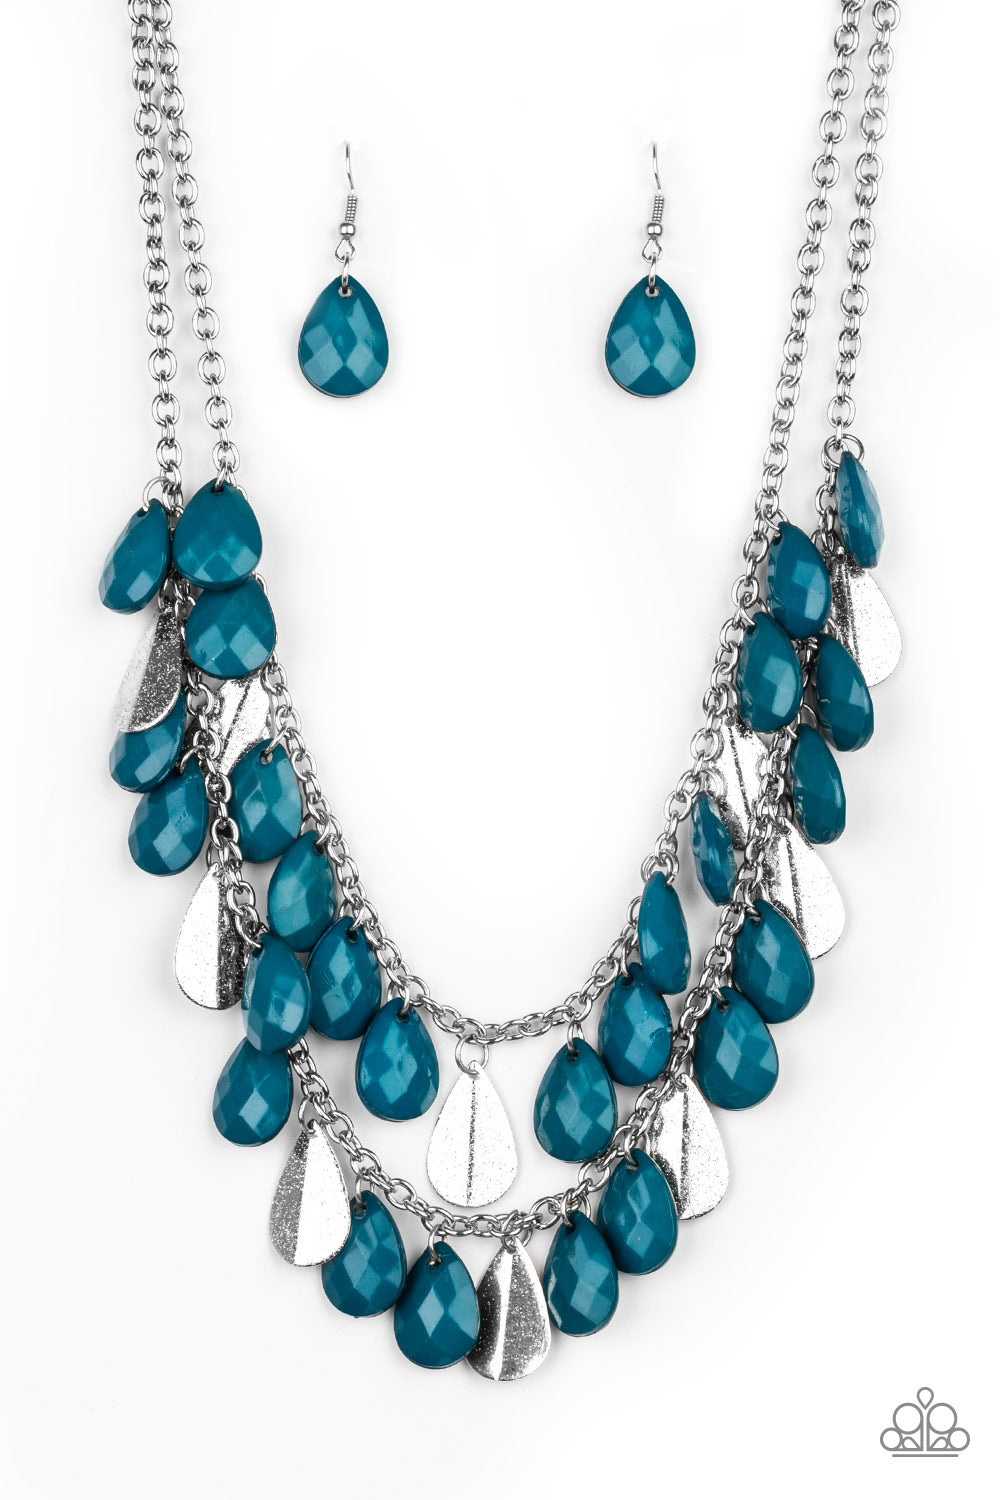 Life of the FIESTA Blue Paparazzi Necklace Cashmere Pink Jewels